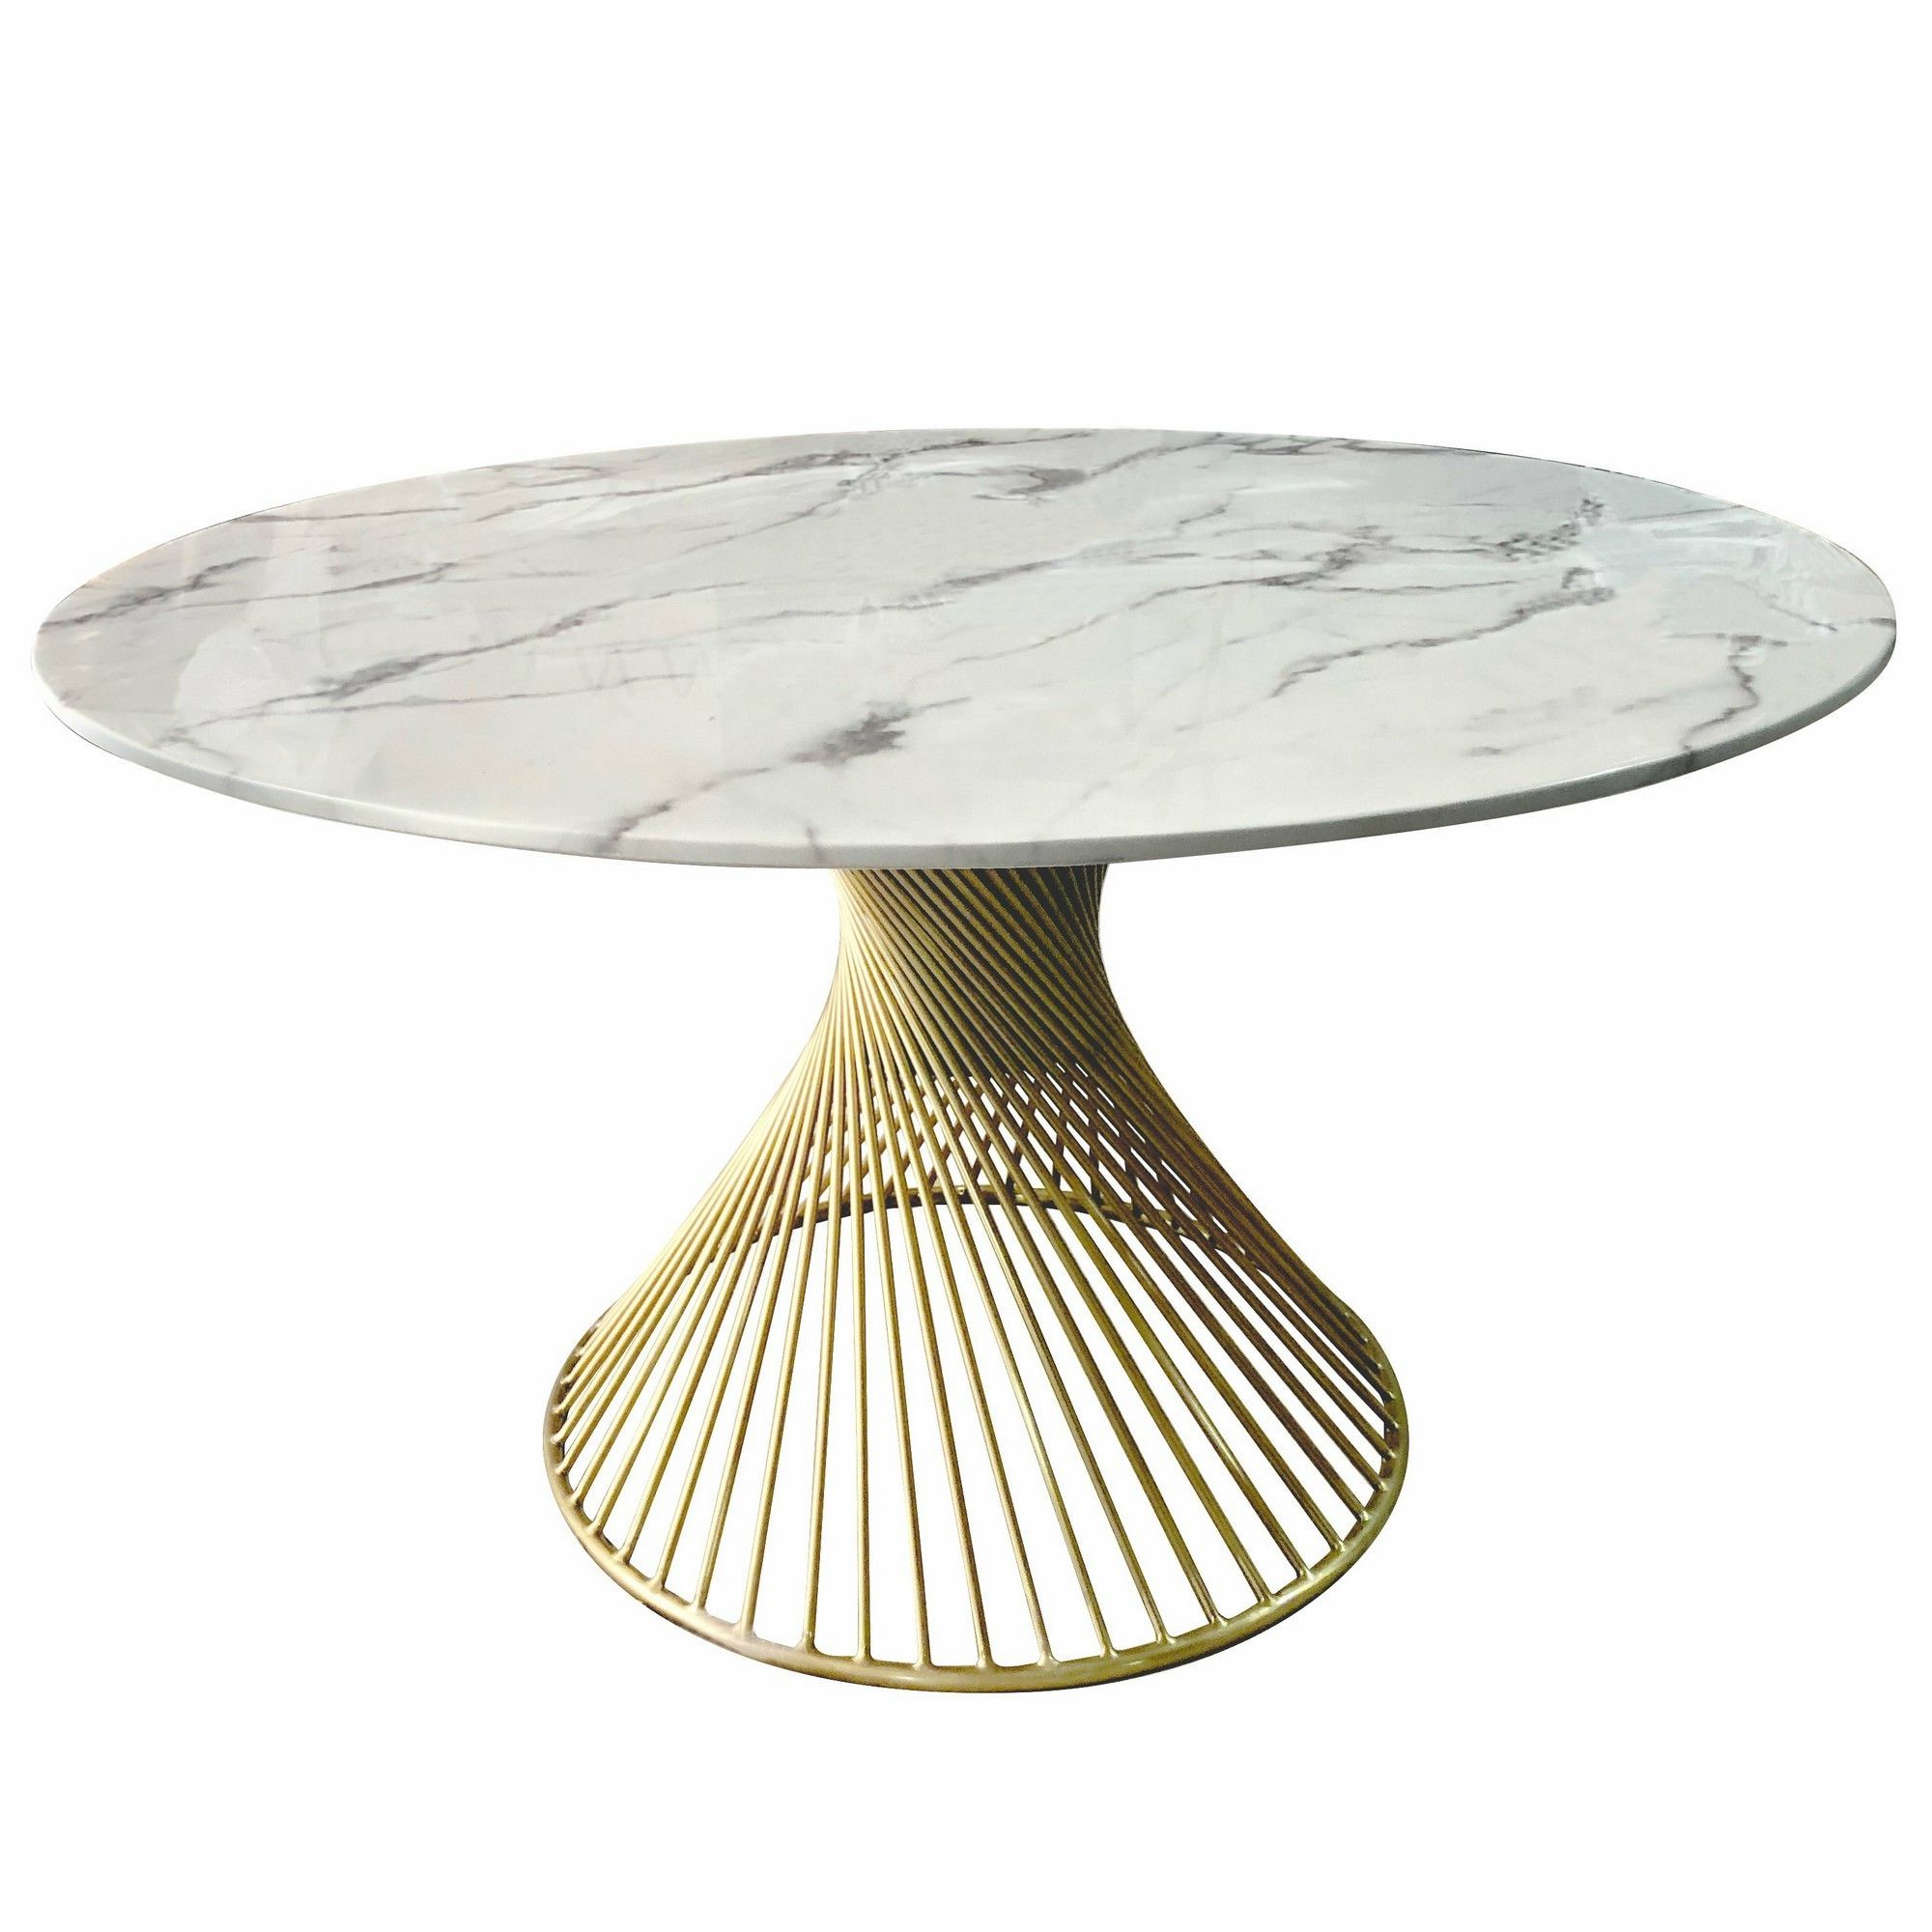 Fashionable Faux Marble Gold Outdoor Tables Throughout Tornado Faux Marble Round Dining Table, 130cm, White / Gold (View 13 of 15)